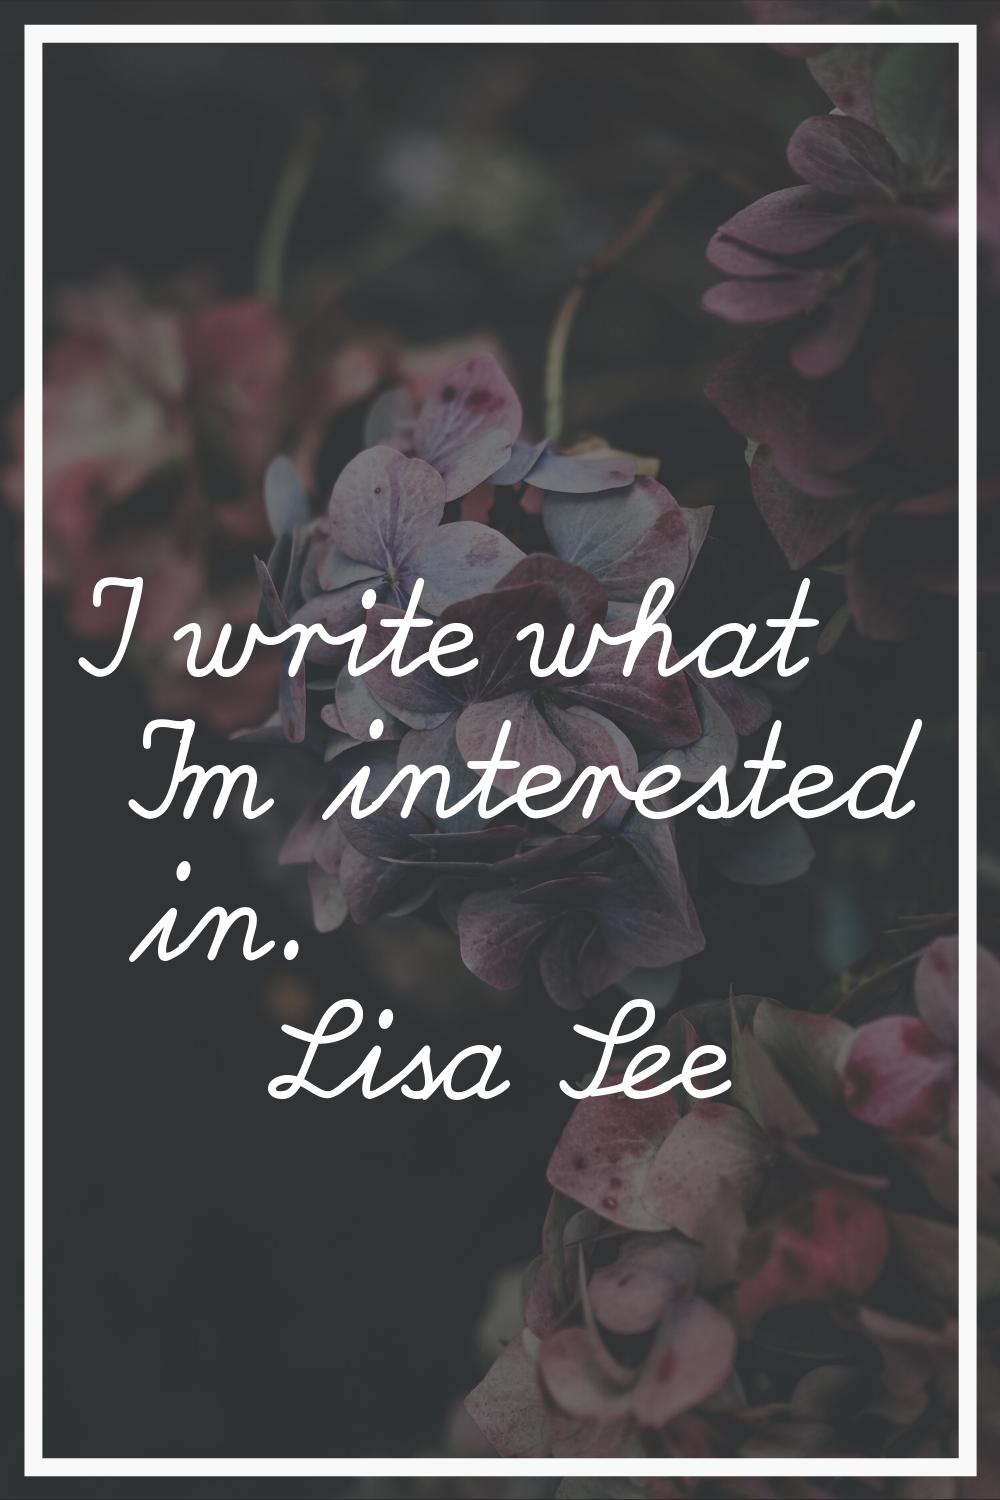 I write what I'm interested in.